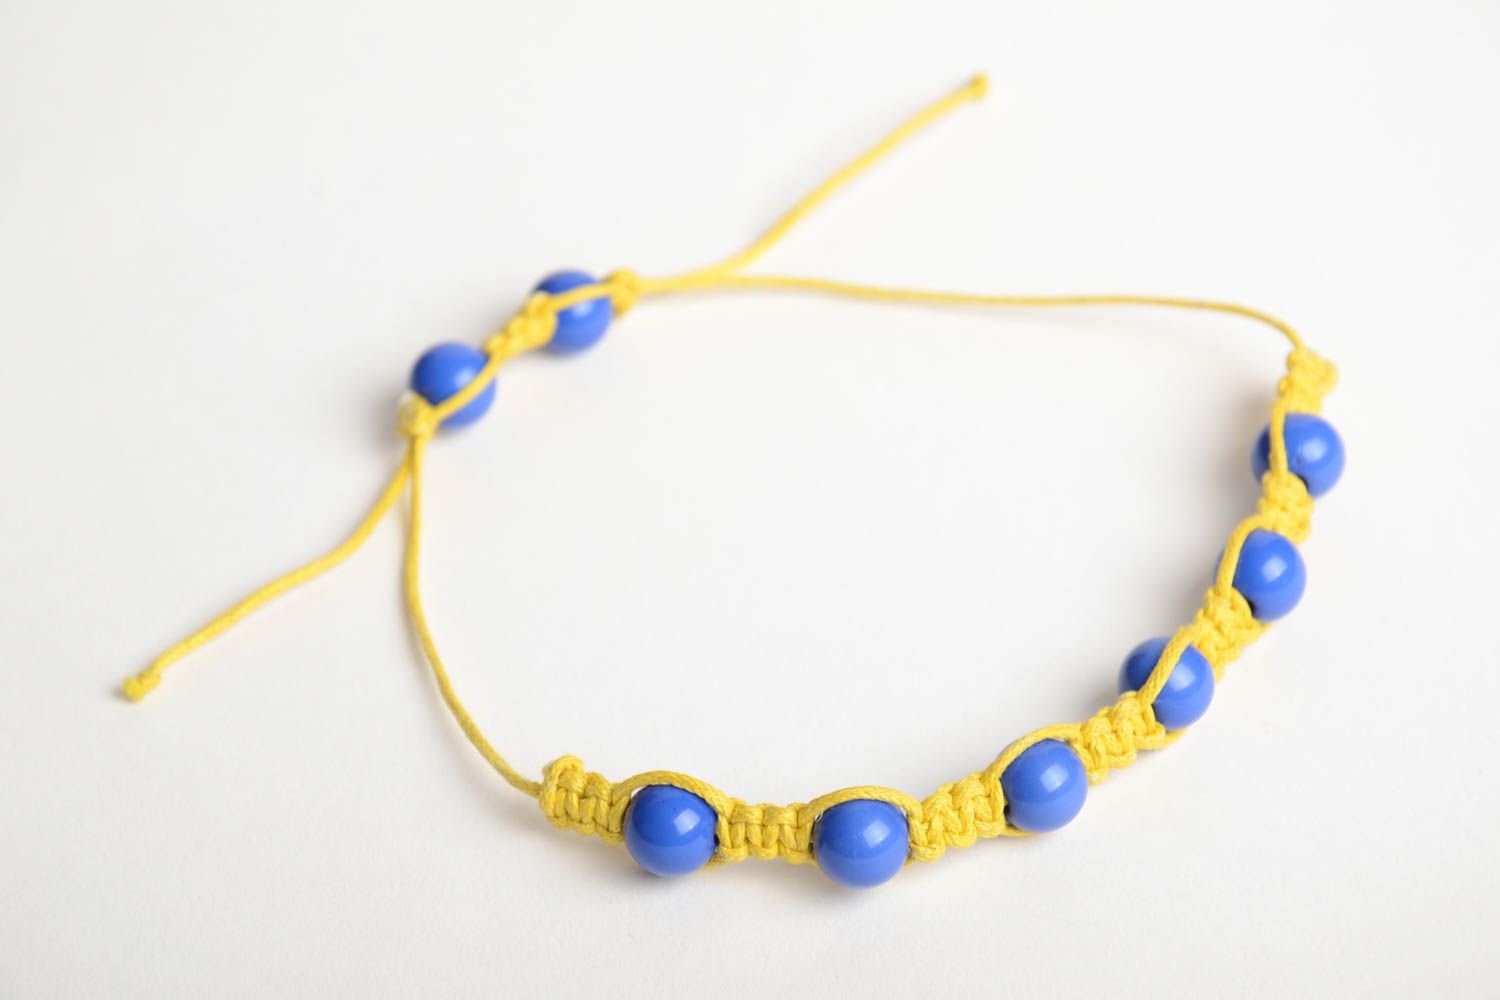 Handmade friendship bracelet woven of yellow cord and blue beads for children photo 3